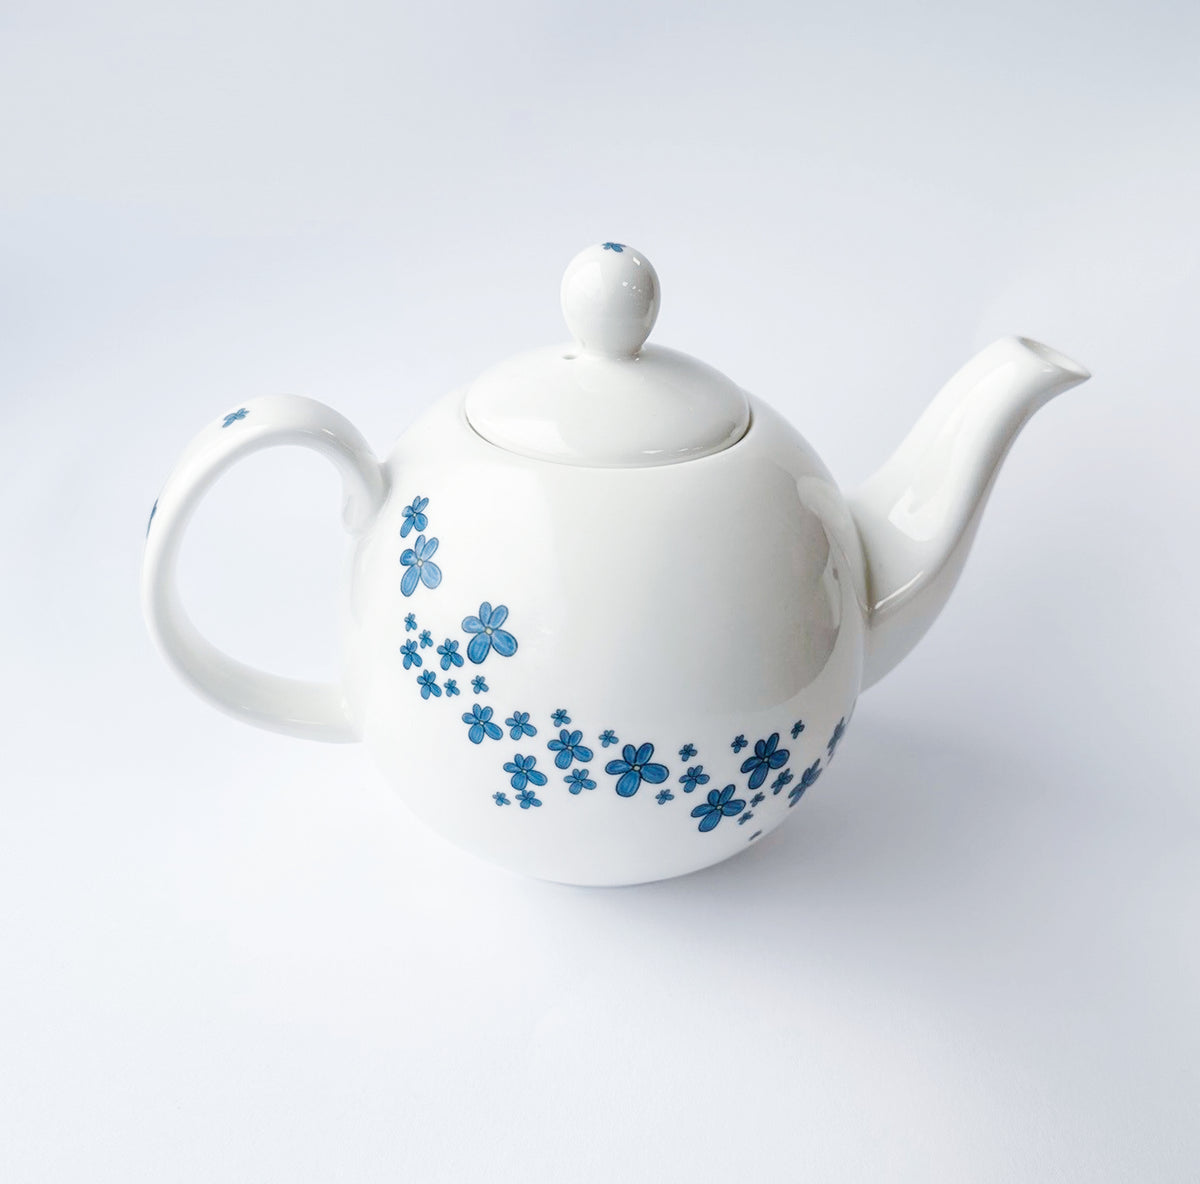 Forget-me-not 6 cup teapot